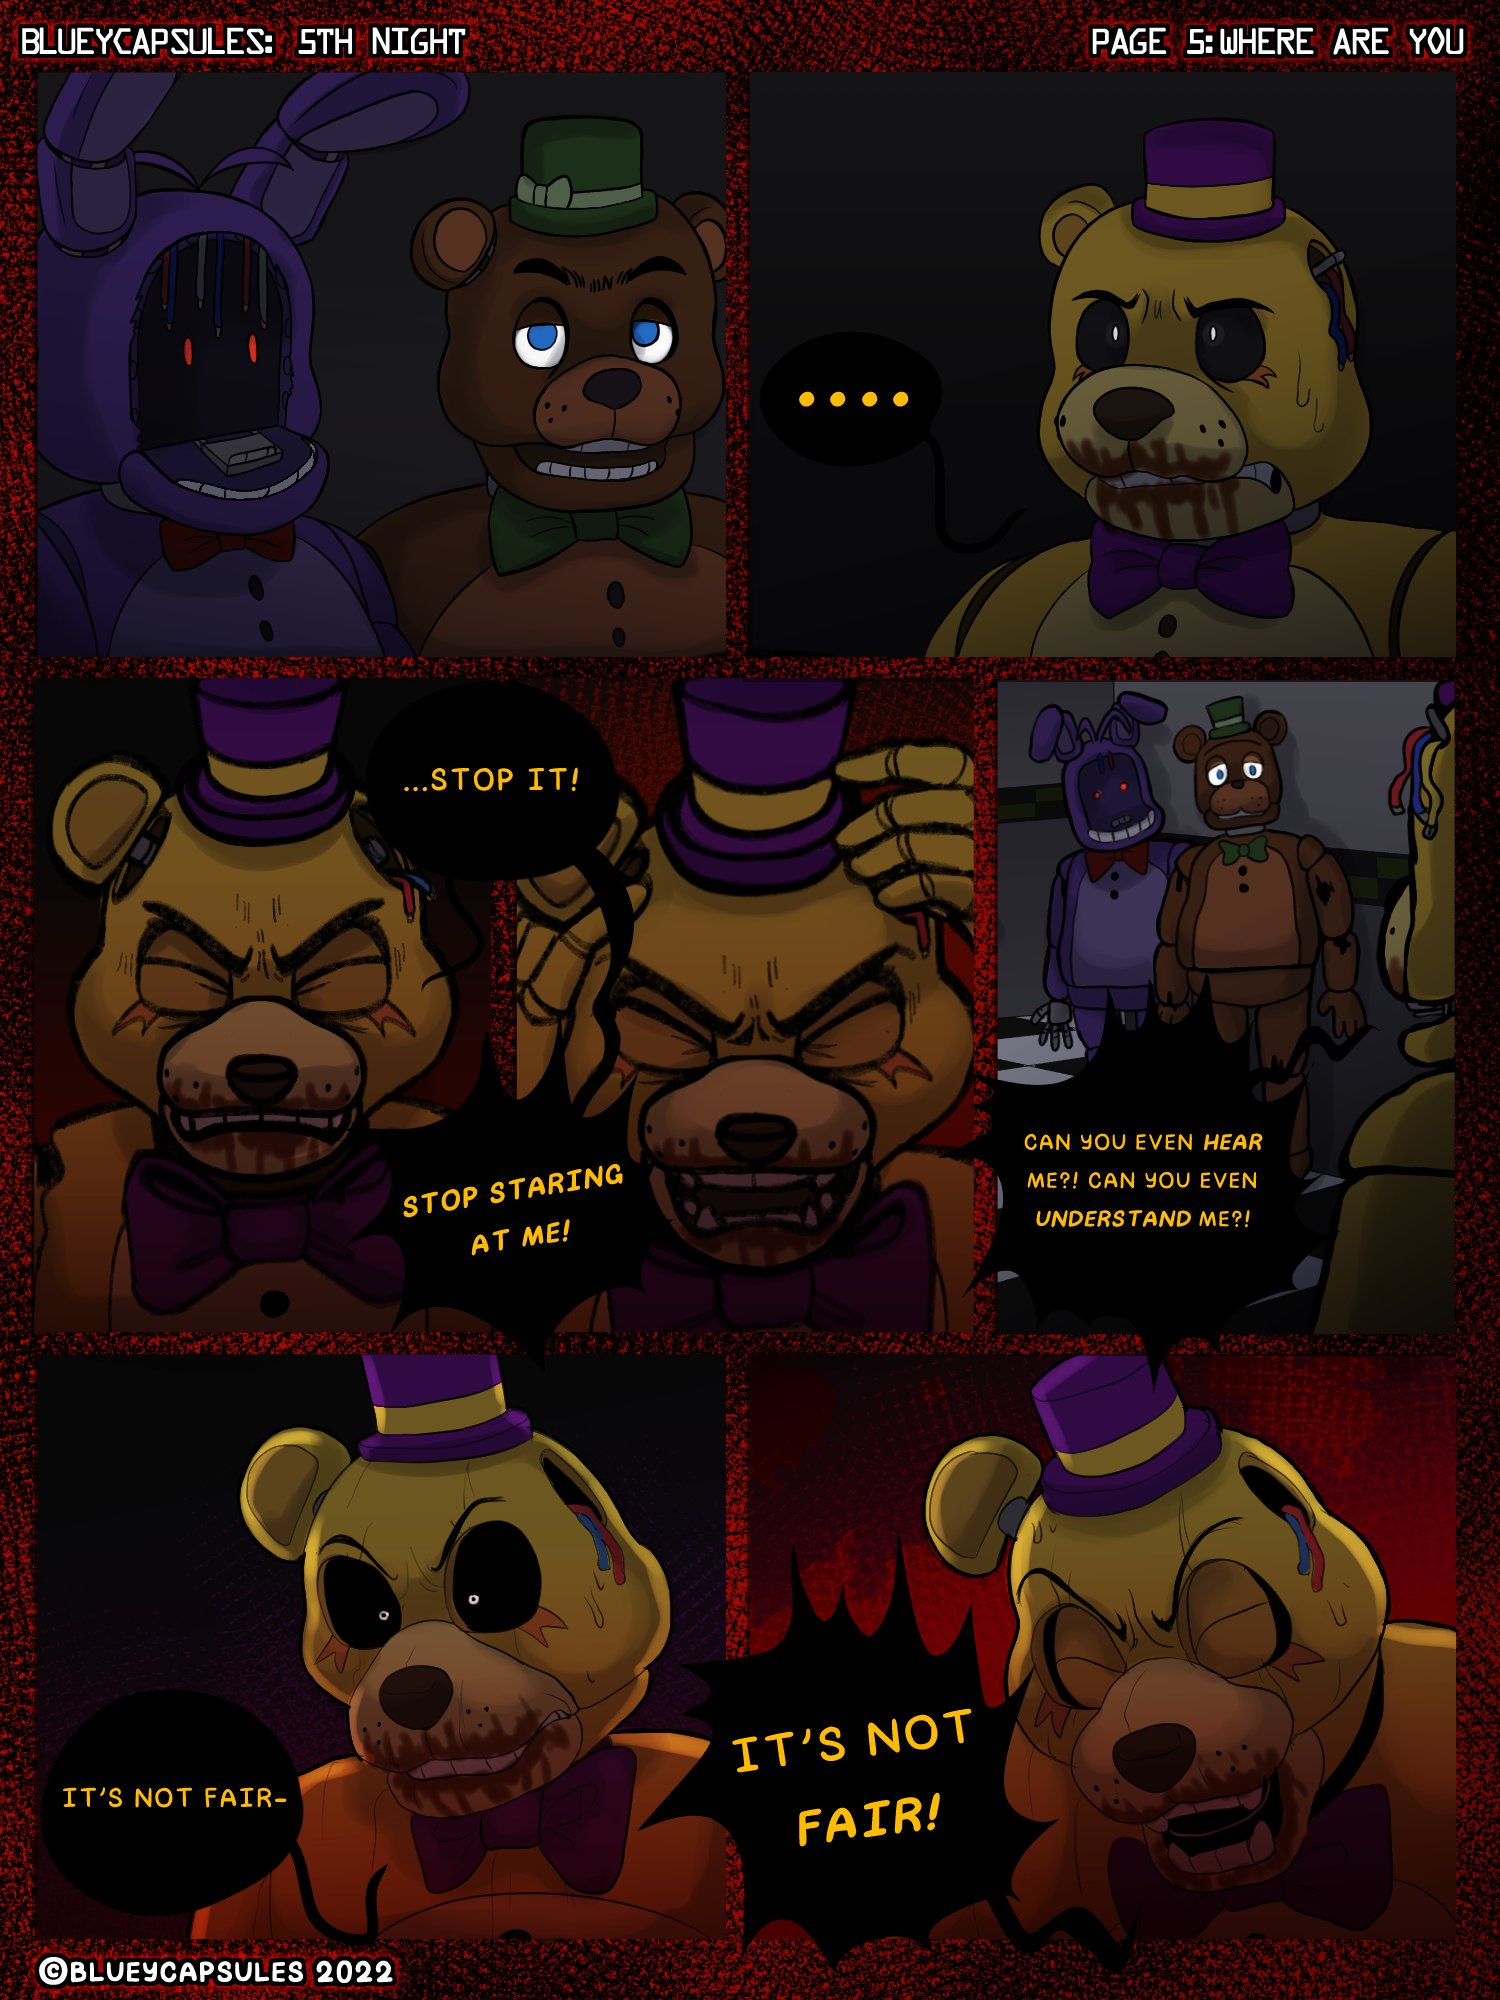 Bluey Capsules on Twitter  Fnaf funny, Fnaf, In this moment